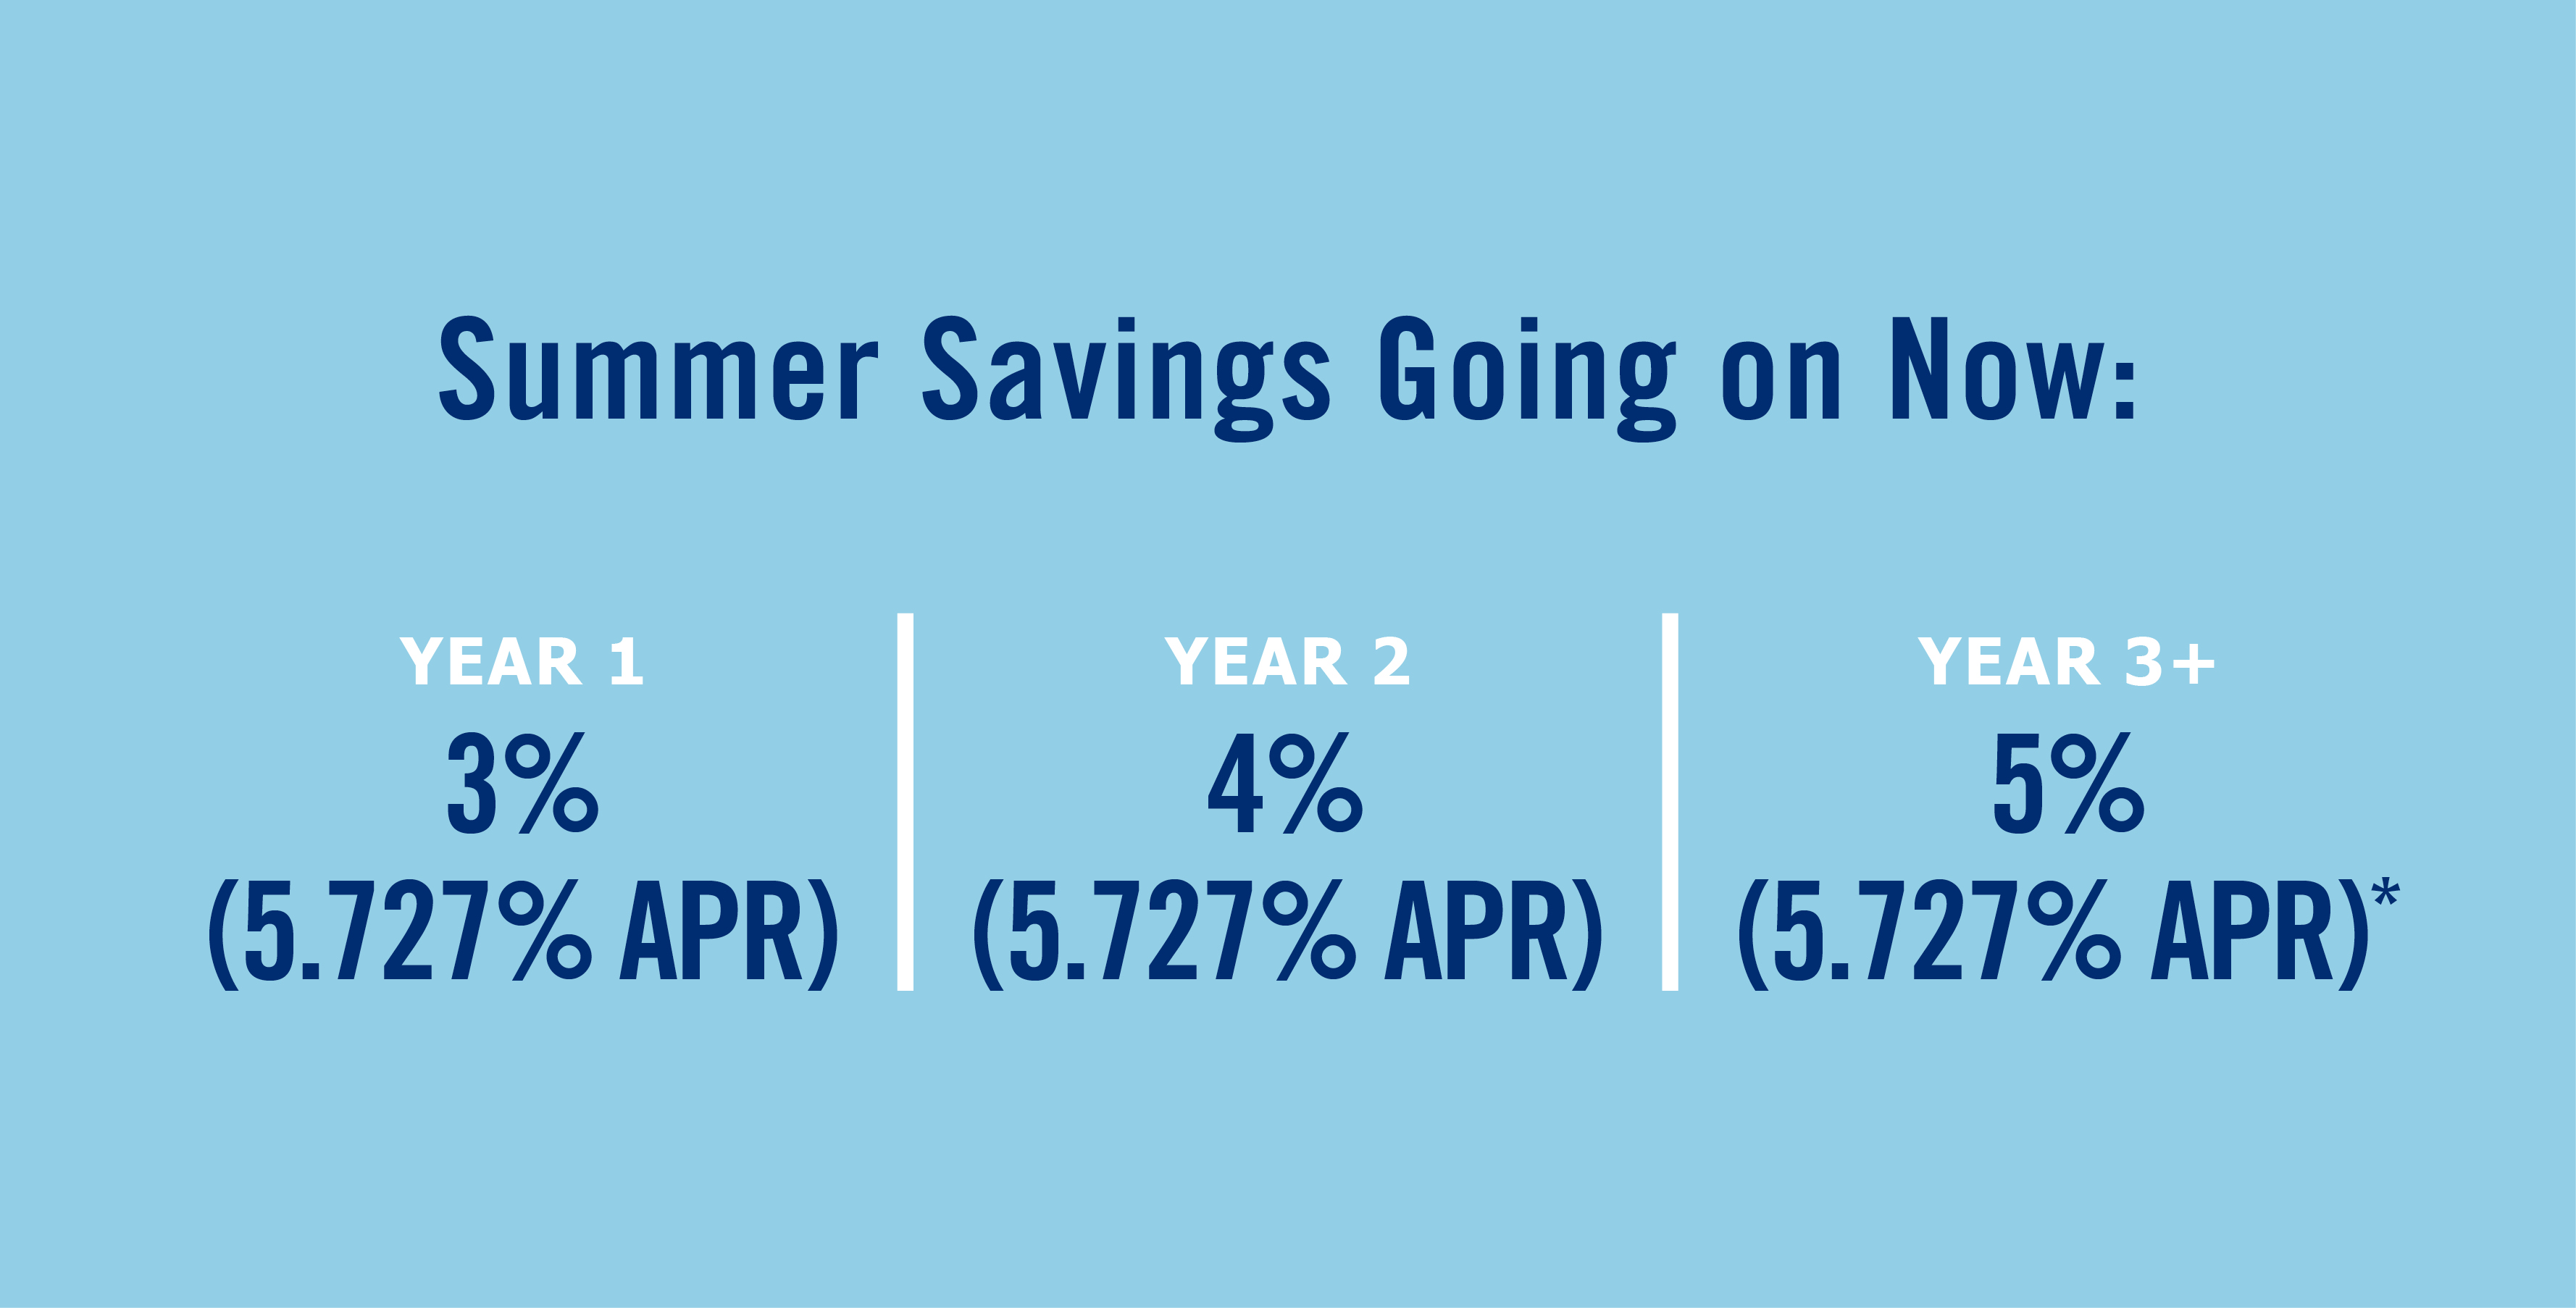 Summer Savings goin on now, save with an interest rate buydown*